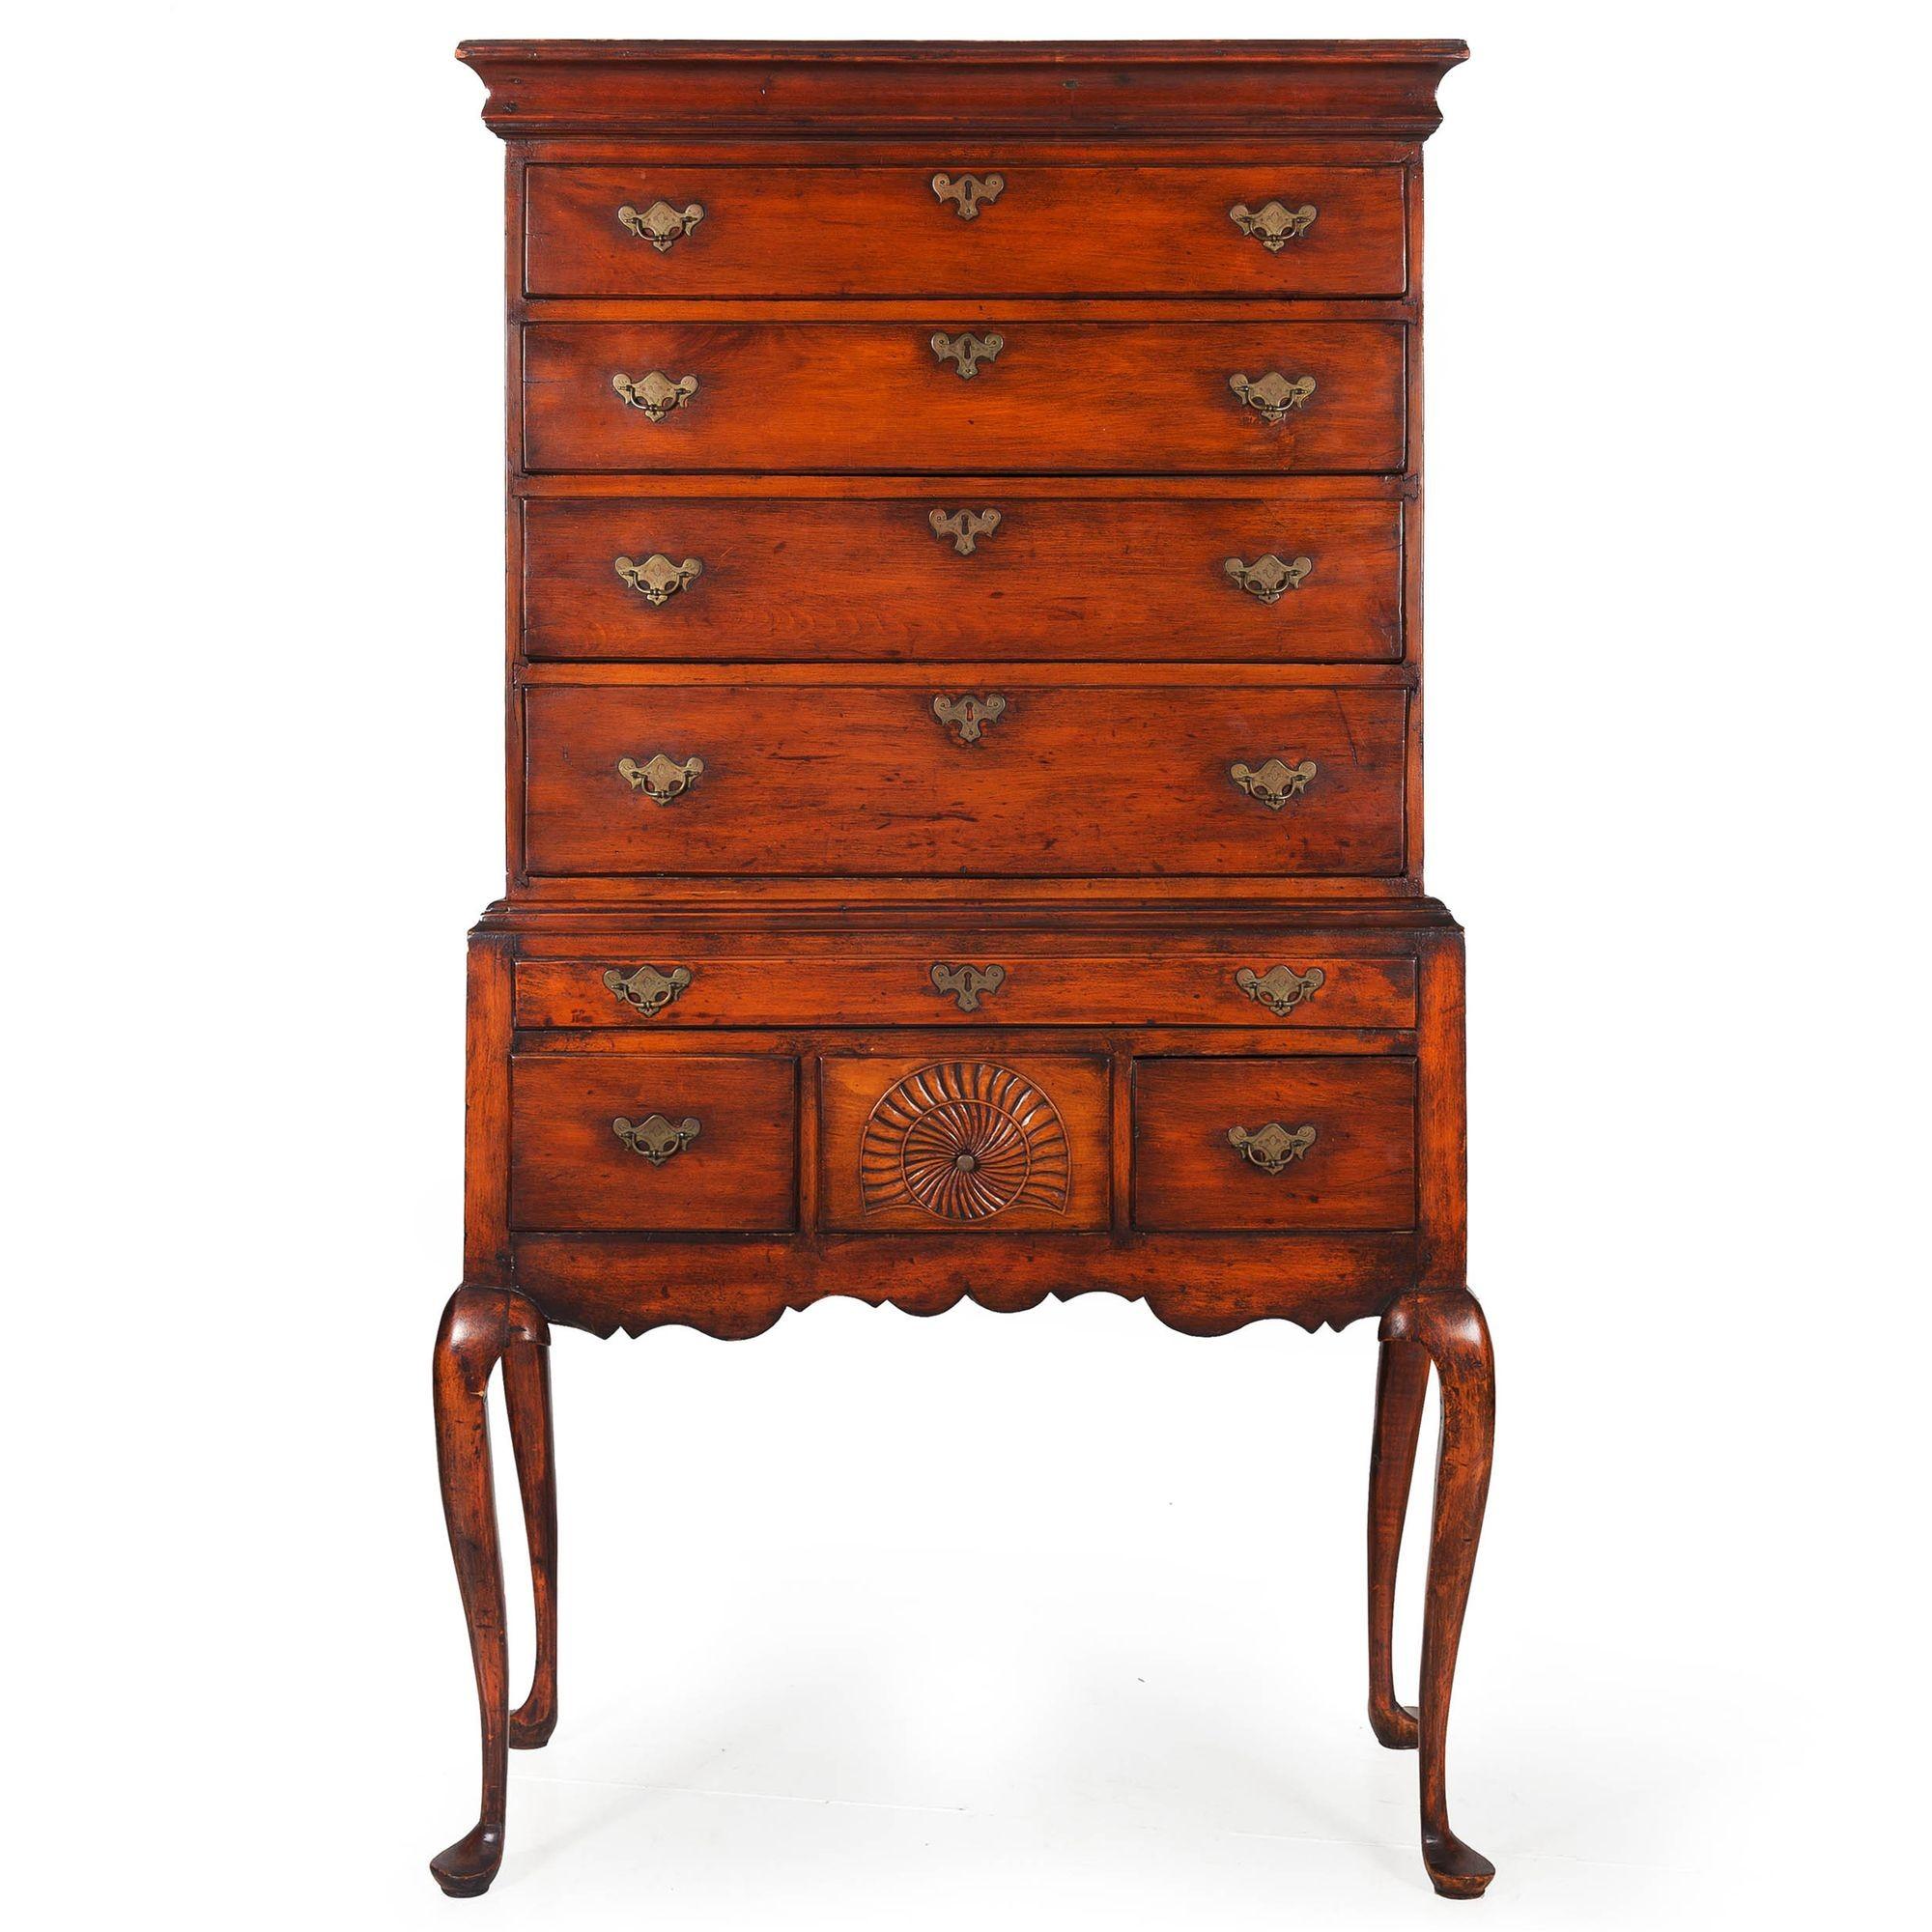 QUEEN ANNE CARVED AND FIGURED SYCAMORE FLAT-TOP HIGHBOY
New England States, circa 1760-1780  formerly with Sotheby's in 2003
Item # 209MPN16S 

A very fine flat-top highboy executed in beautifully figured and patinated sycamore, it features a bold